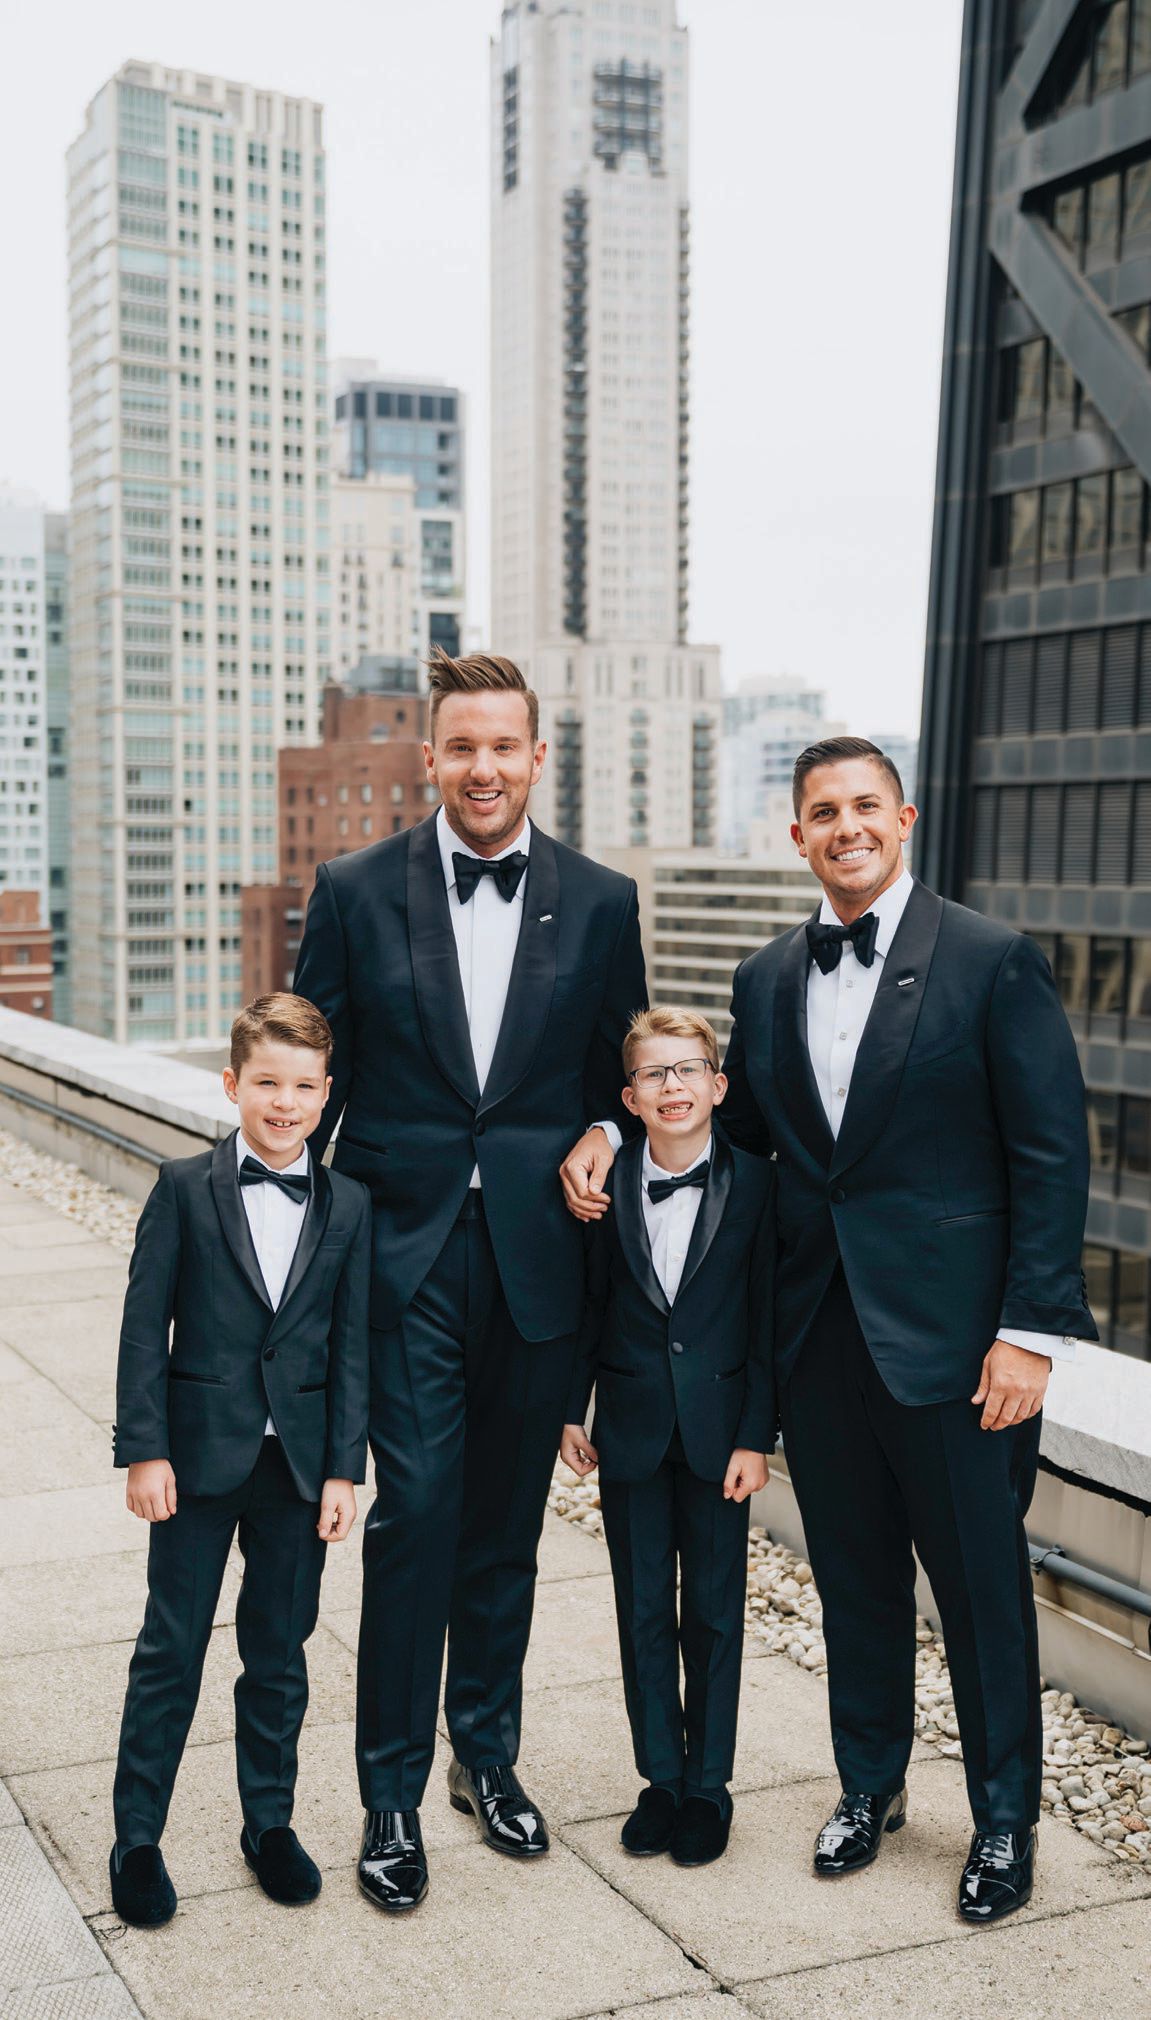 The grooms with their 8-year-old twin sons.